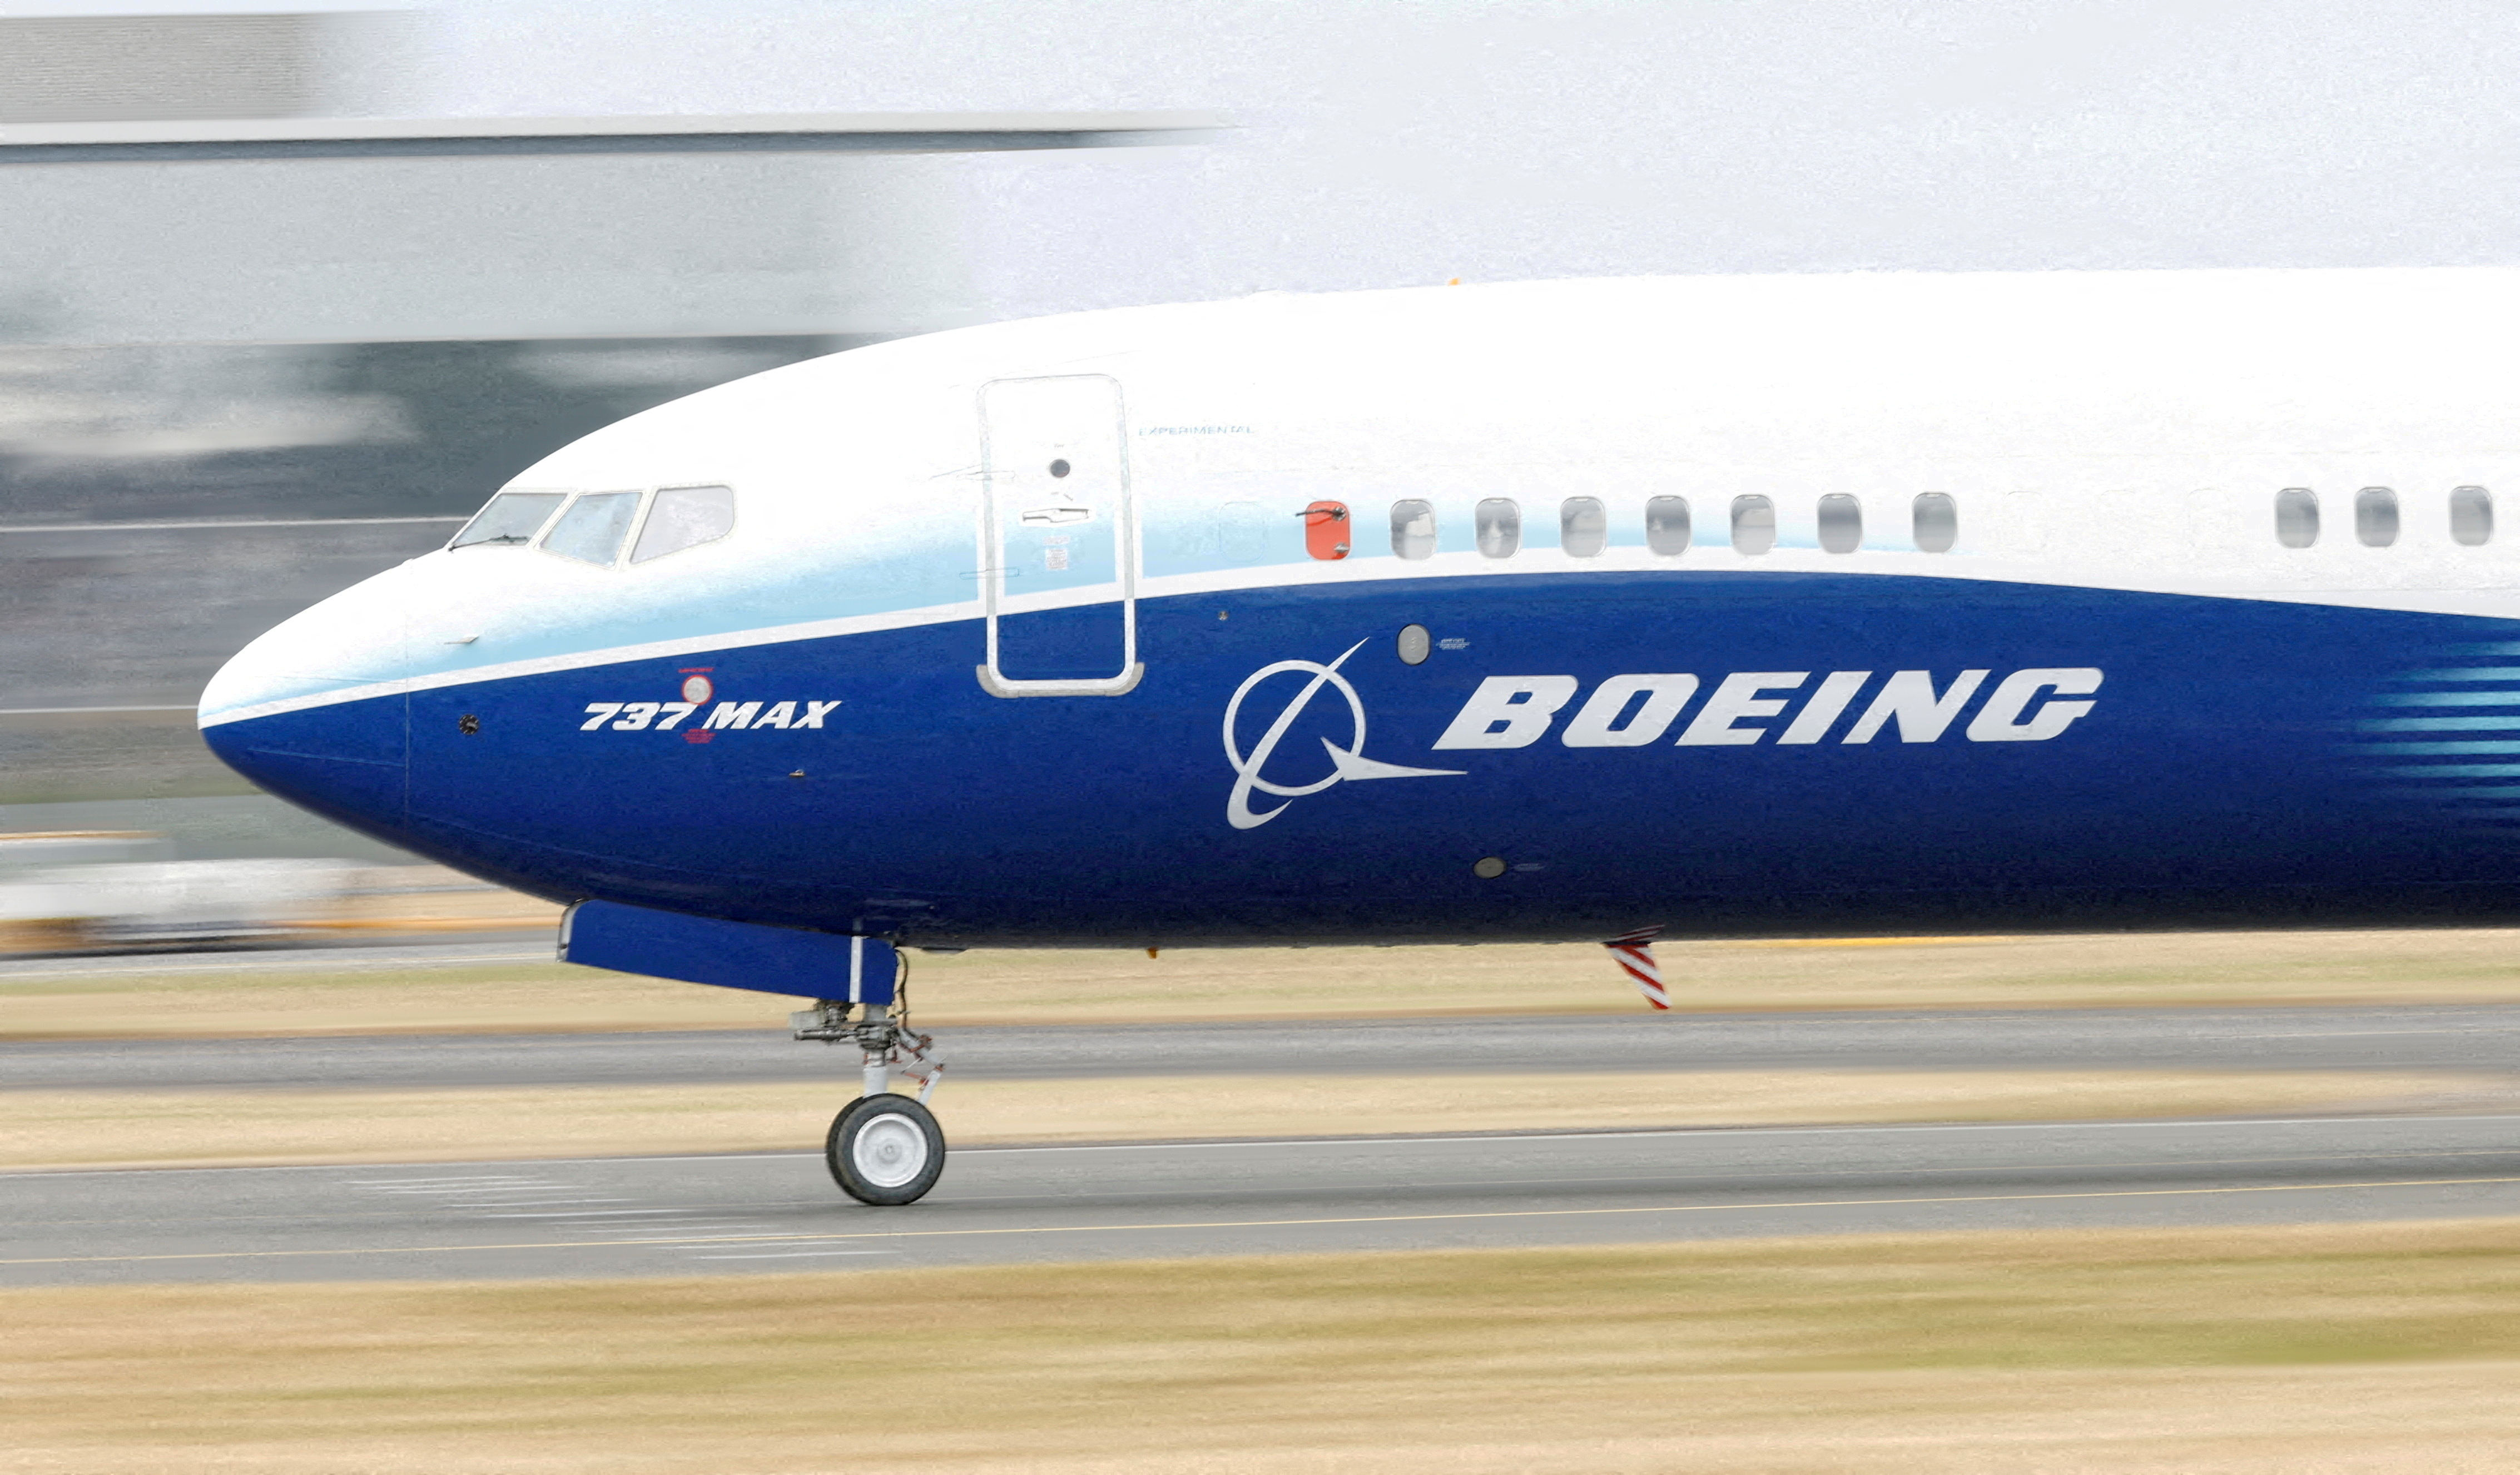 Boeing's revenues rise to $17.9bn and net loss shrinks to $425m